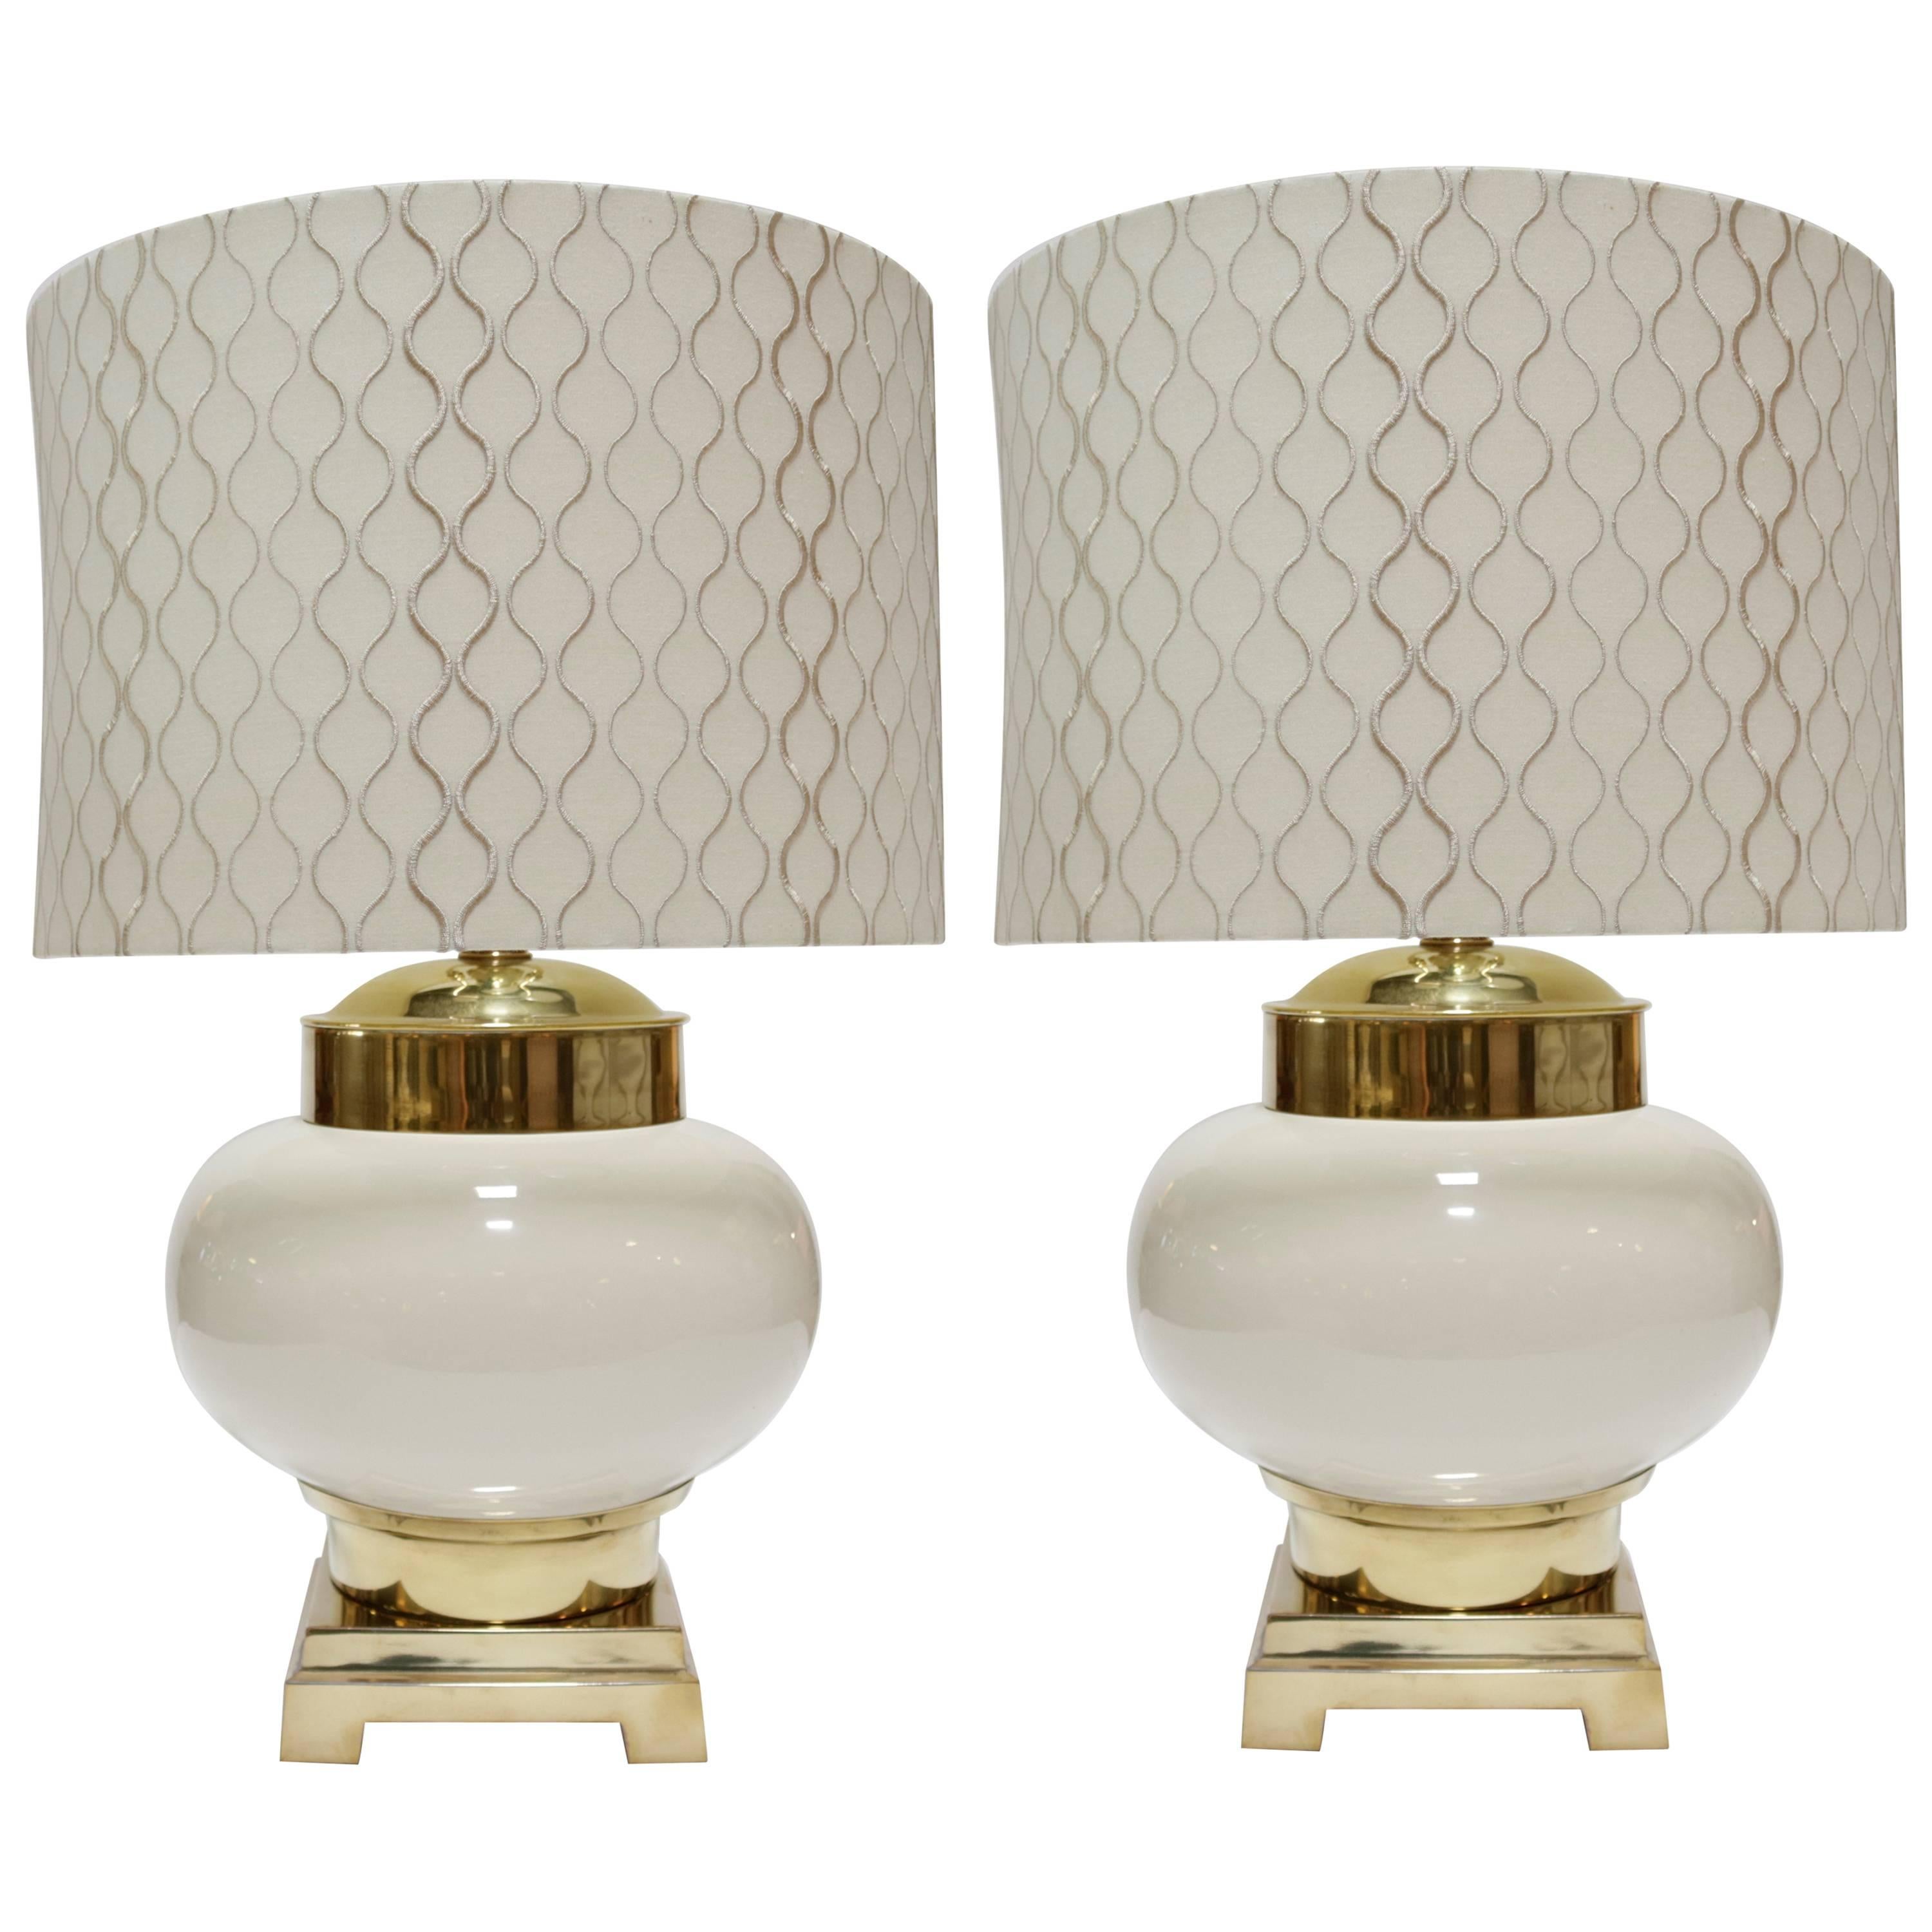 Pair of Midcentury Lamps in Ivory Ceramic and Brass